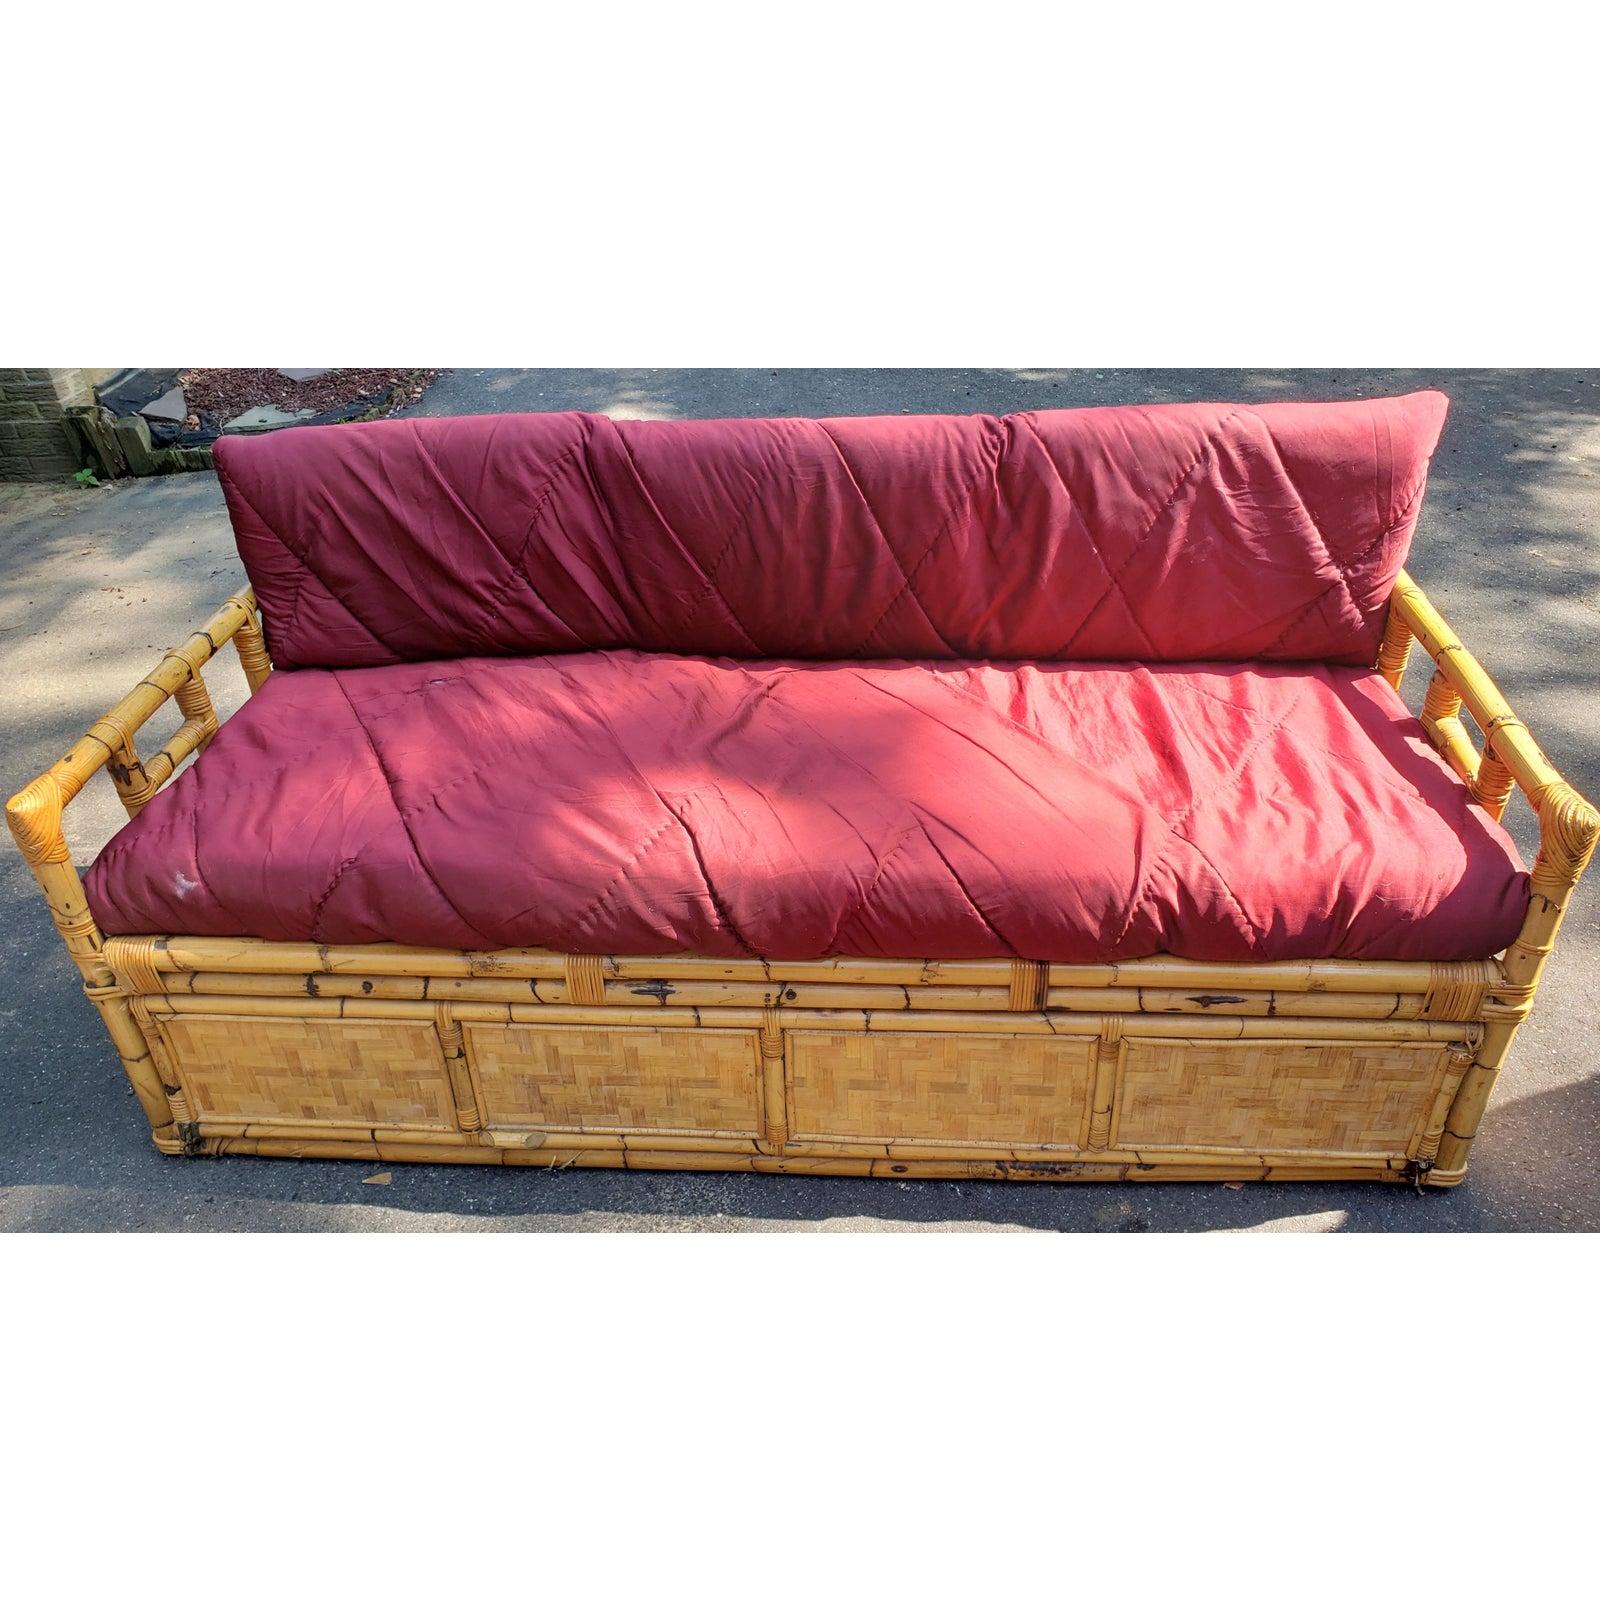 1960s vintage jumbo bamboo Sofa with gated underneath storage. Two large seat and back cushions in polyester with wear consistent with age and use, but no tear. Front lifts up as a gate for large storage area underneath. 
Measurements are: 78.5